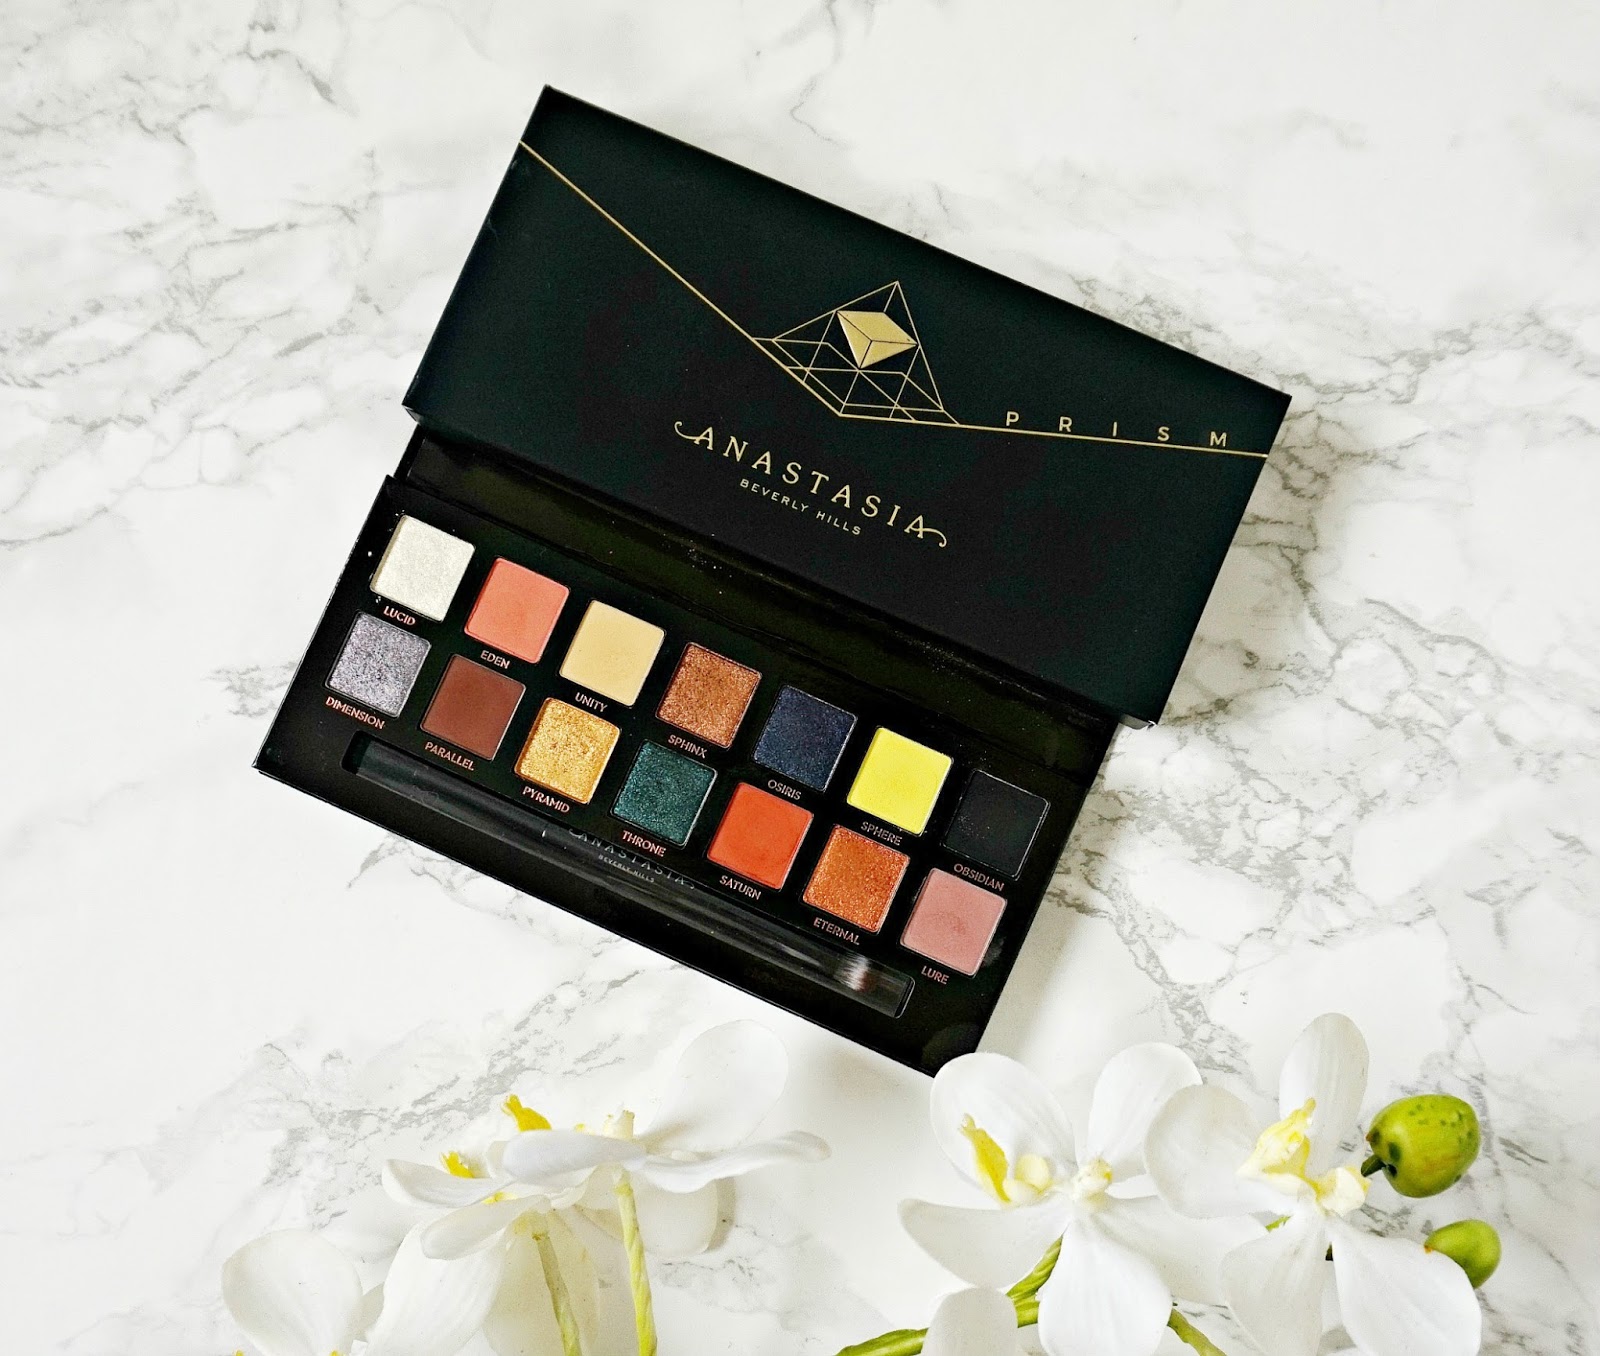 Anastasia Beverly Hills Prism Palette Review